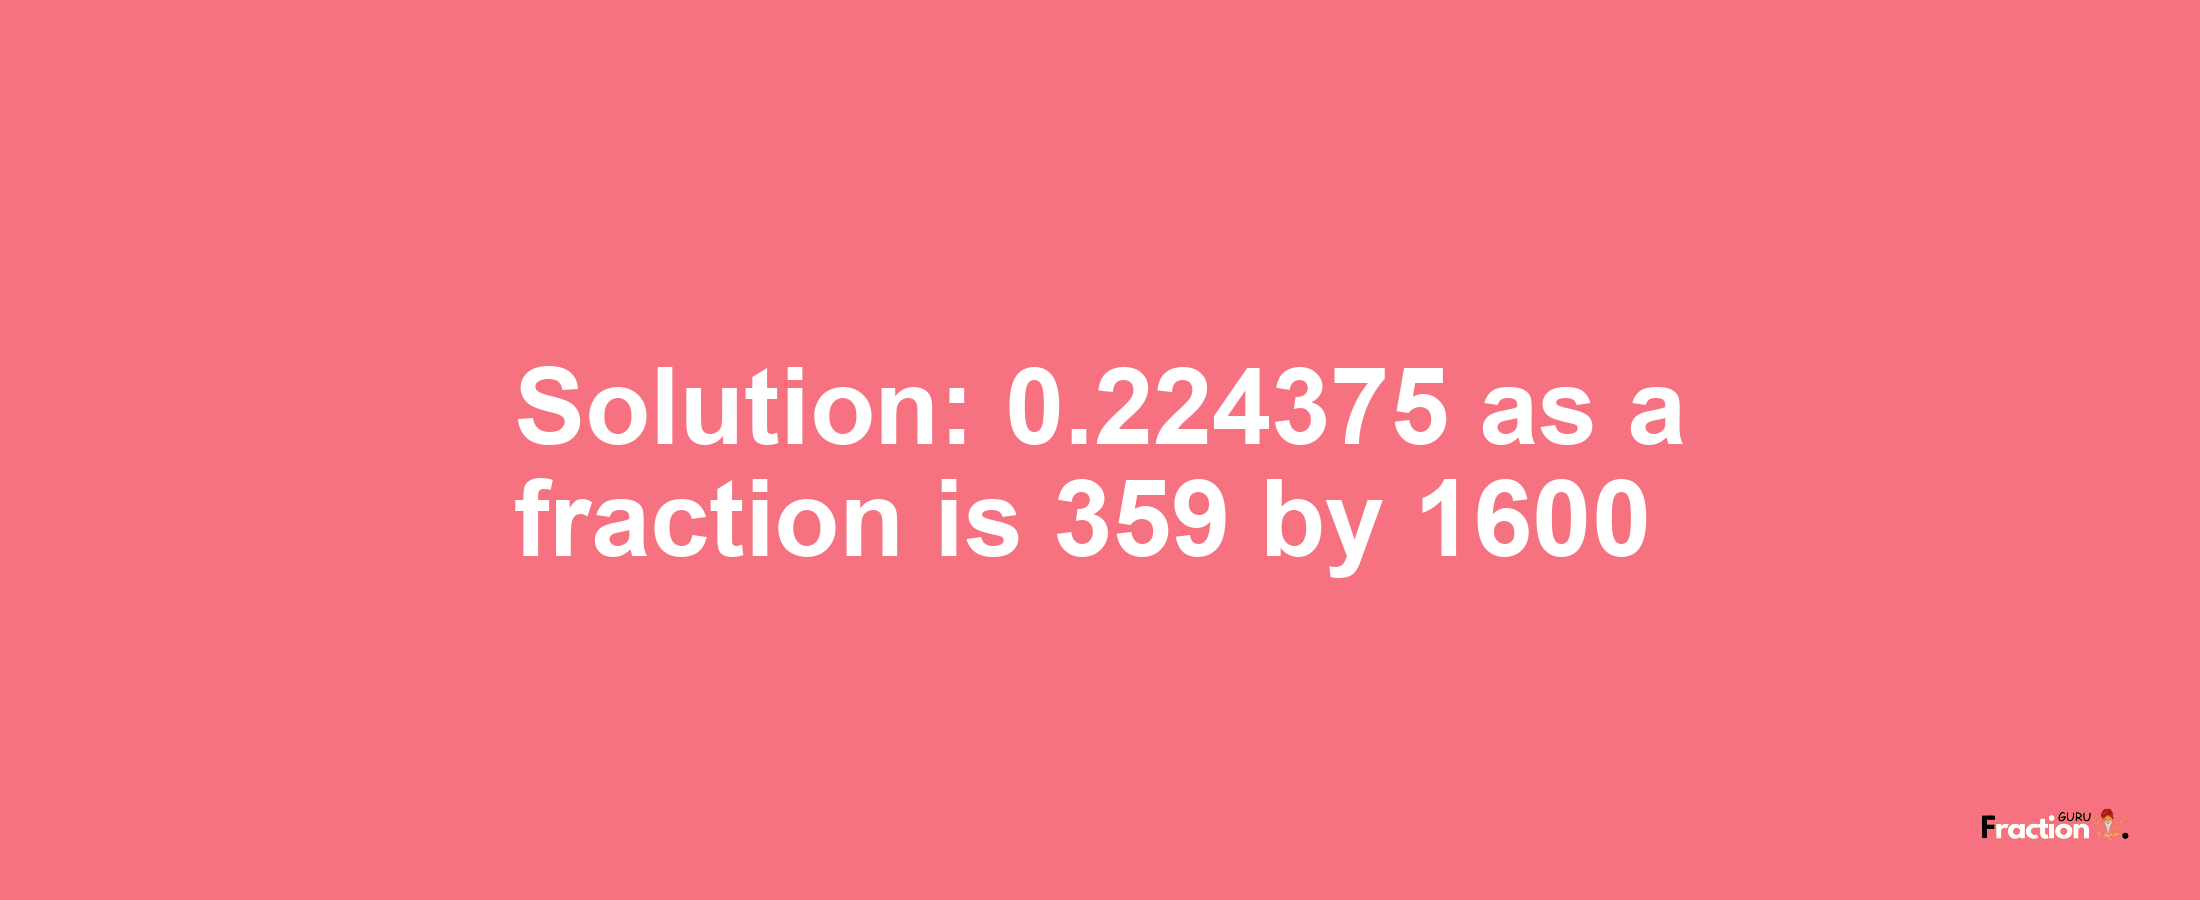 Solution:0.224375 as a fraction is 359/1600